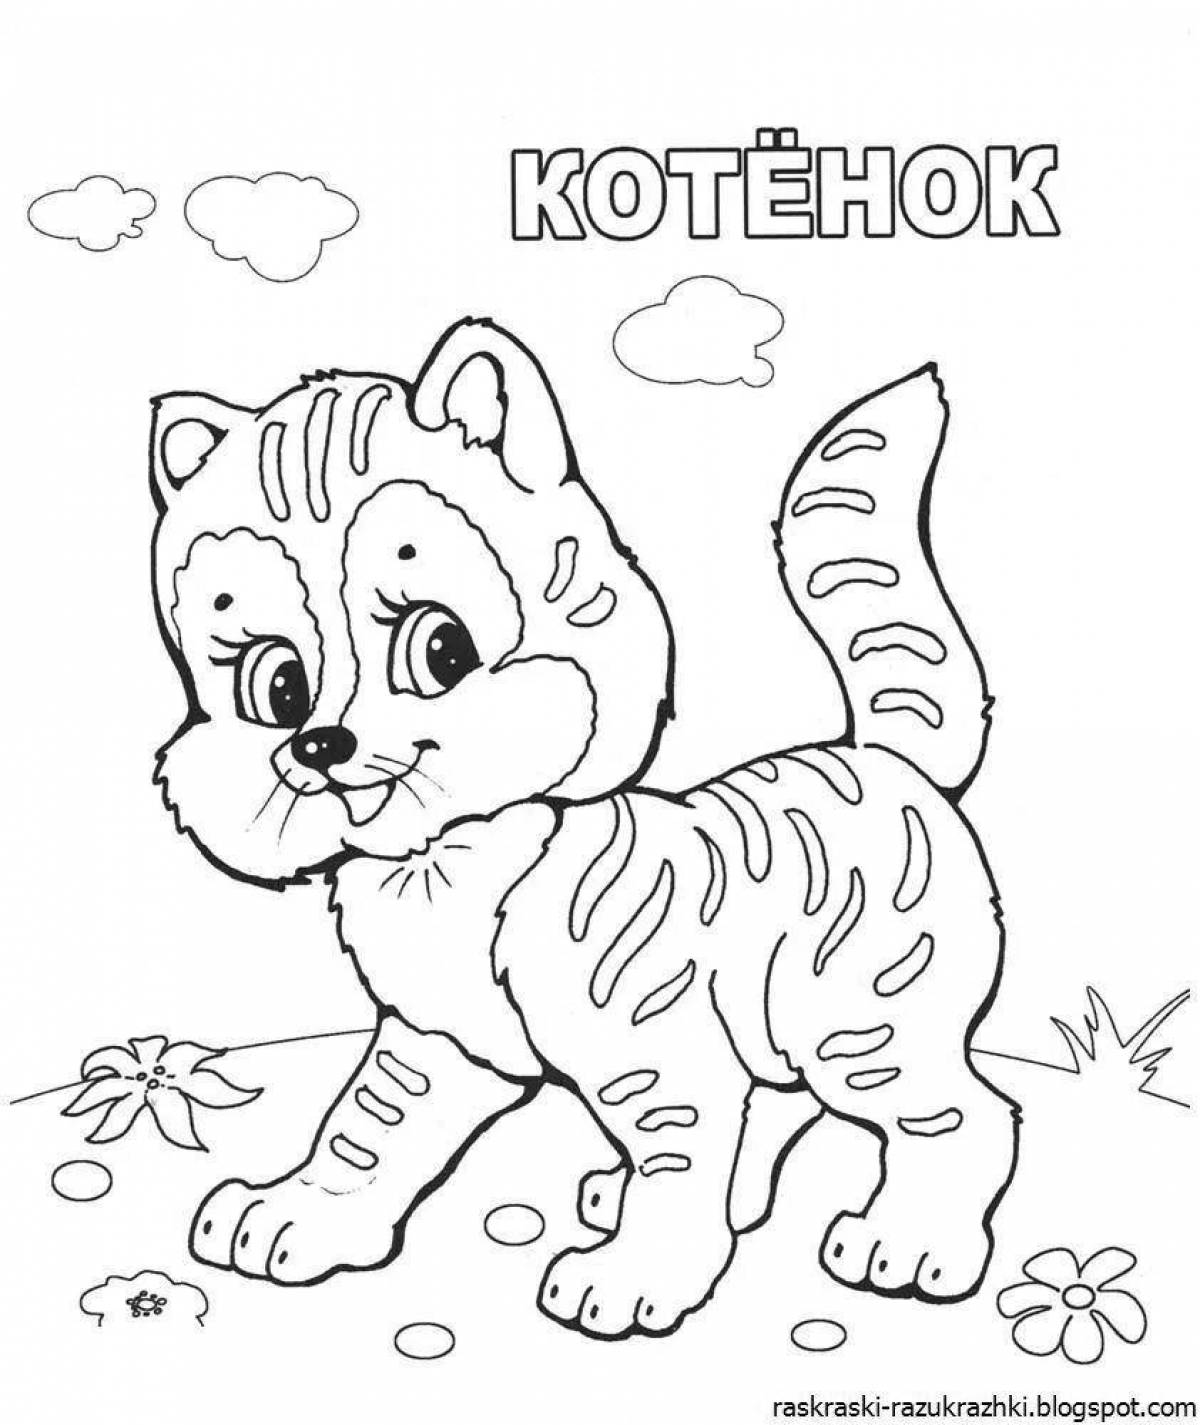 Great animal coloring book for 5 year olds